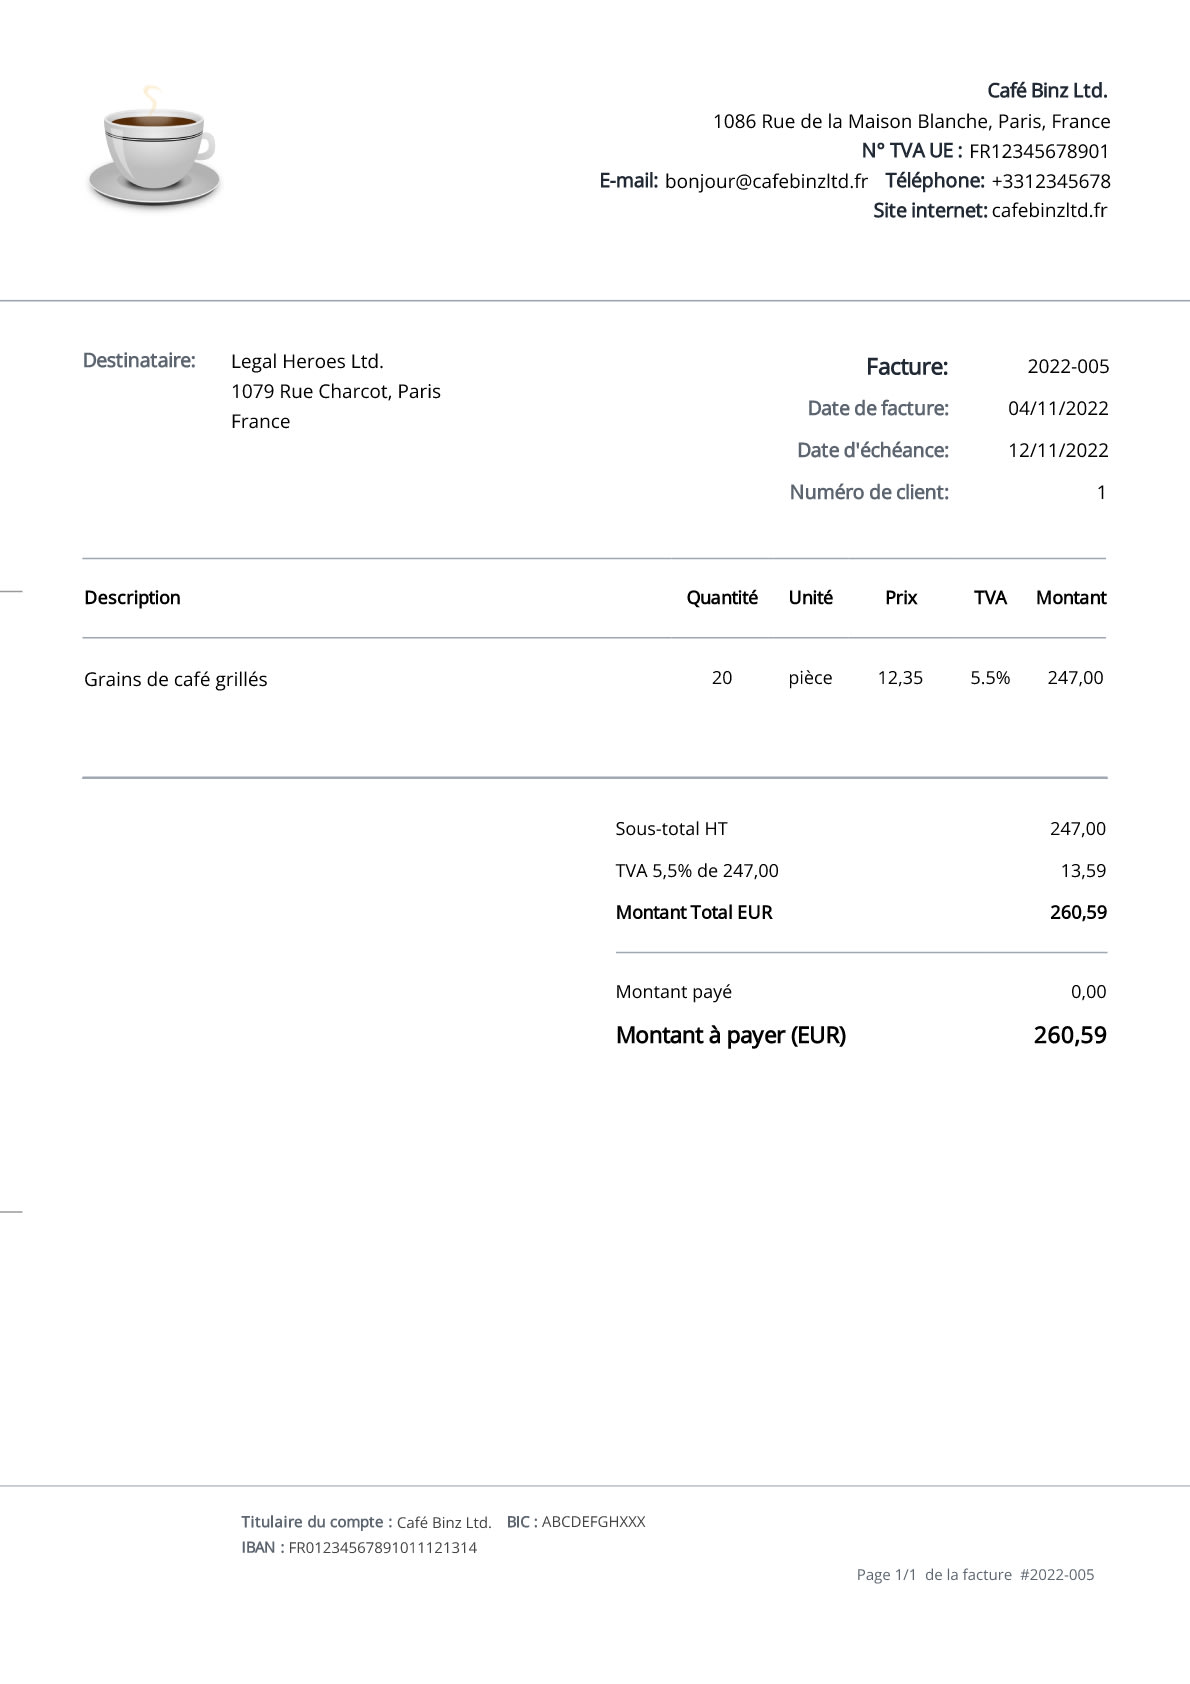 Sample invoice for a coffee shop